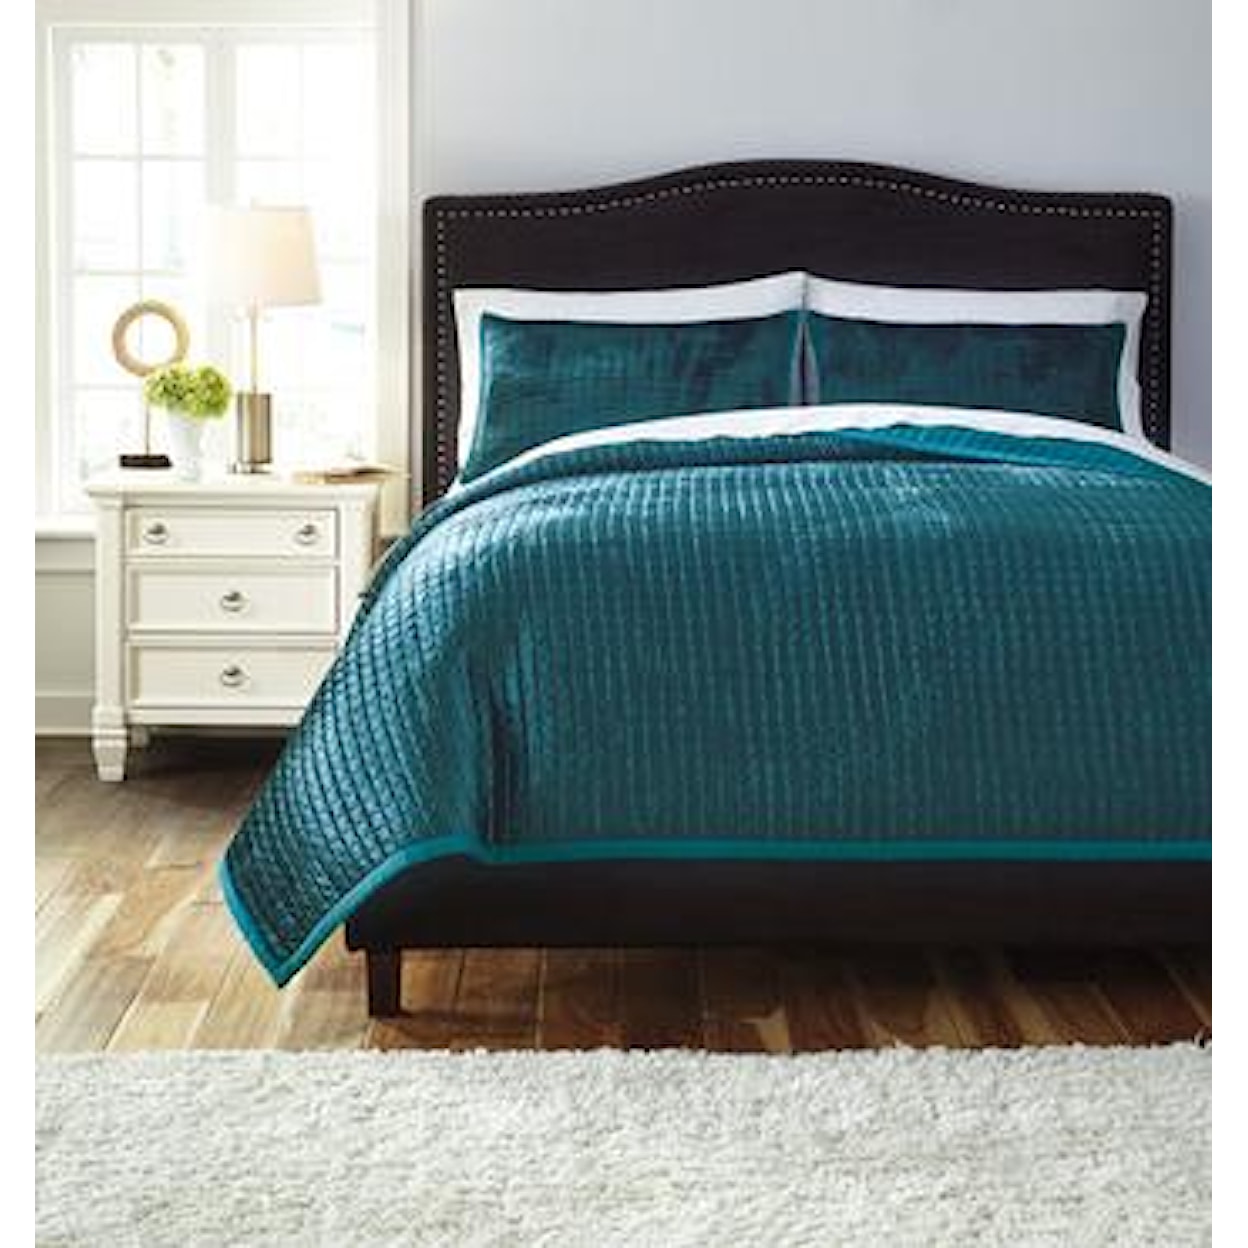 Signature Design by Ashley Bedding Sets Queen Stitched Peacock Comforter Set